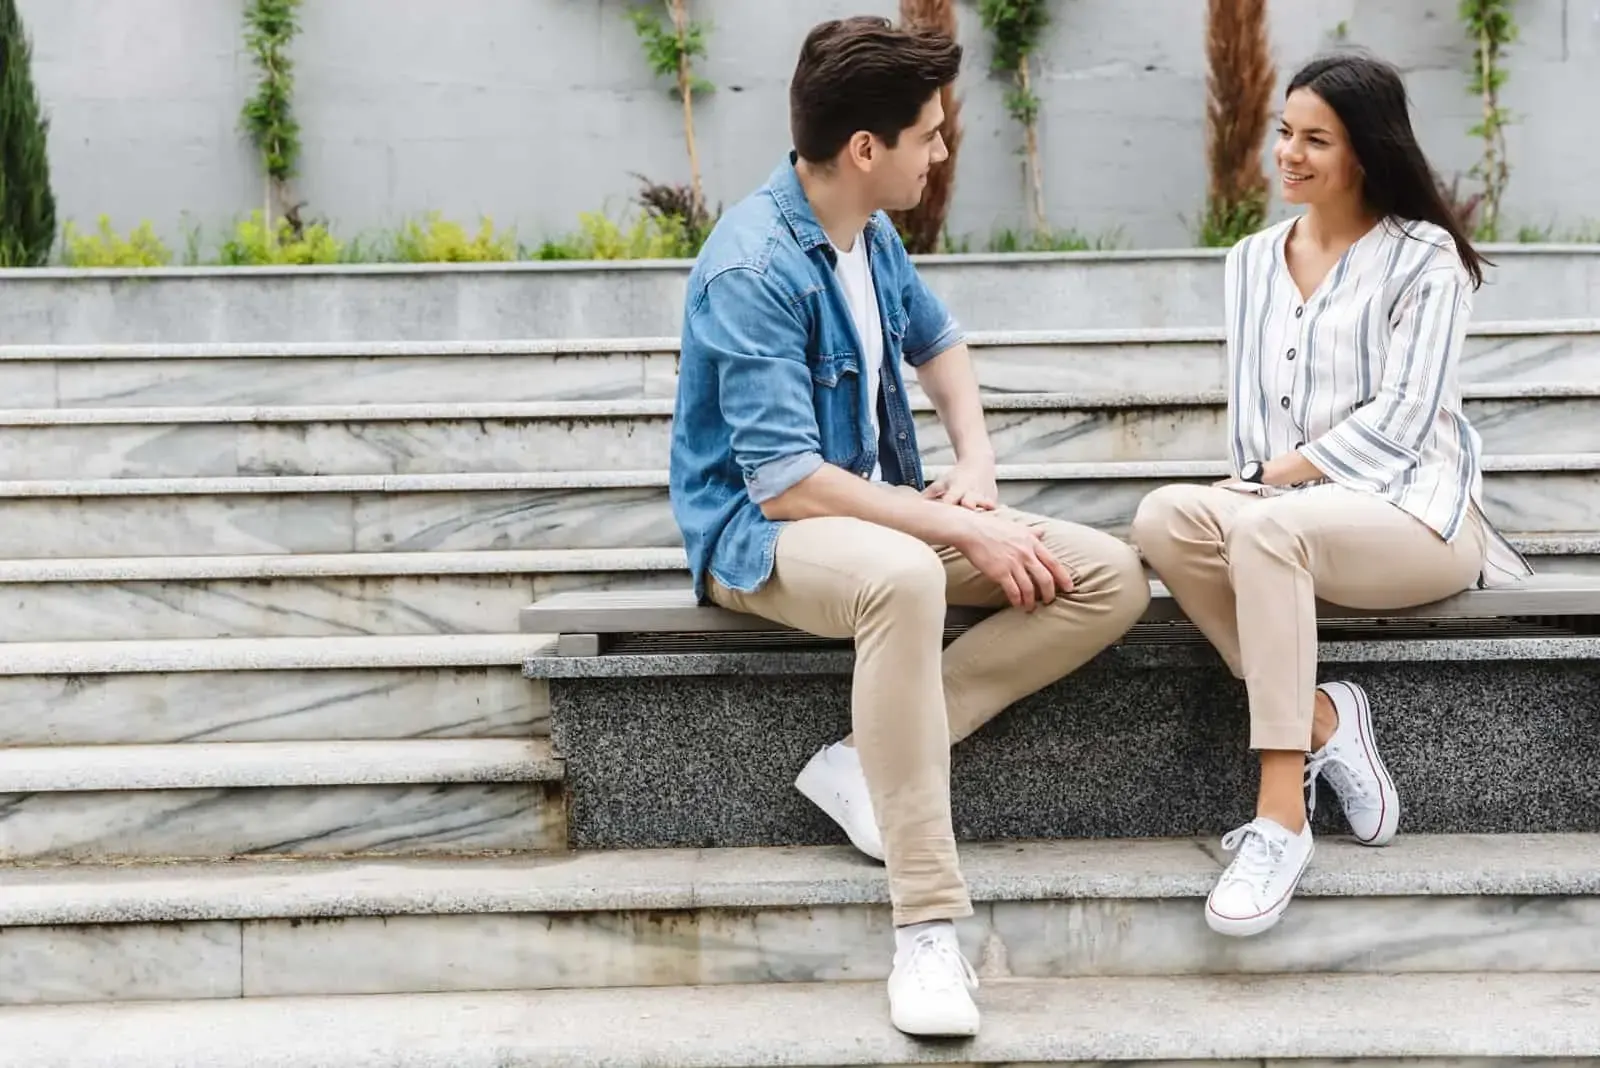 a smiling man and woman sit on a bench and look at each other